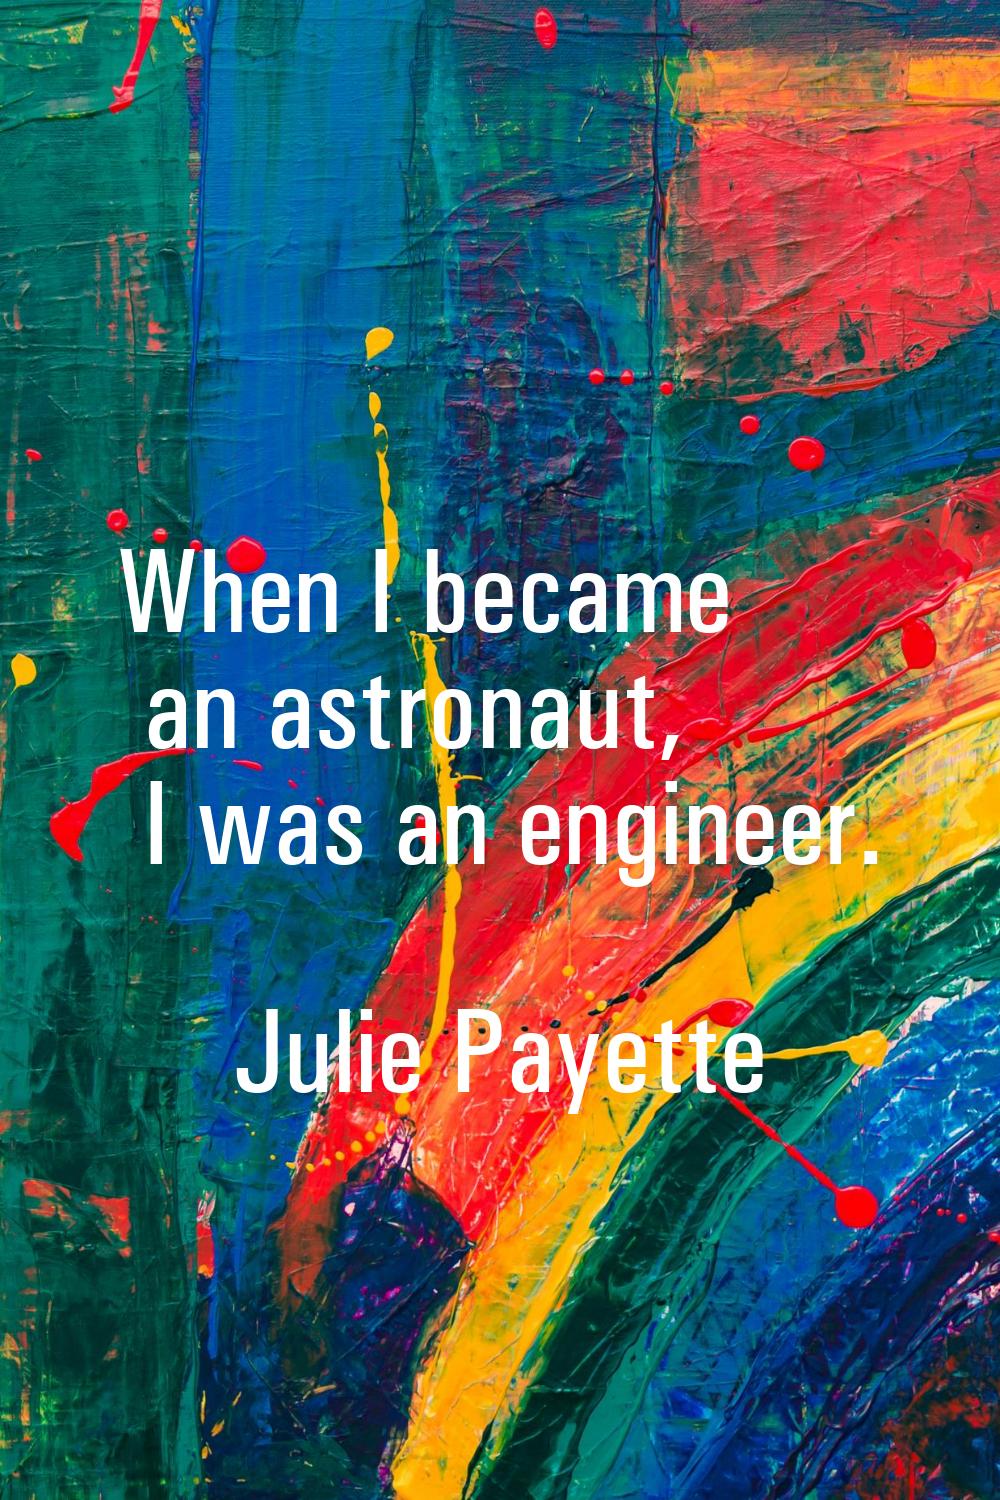 When I became an astronaut, I was an engineer.